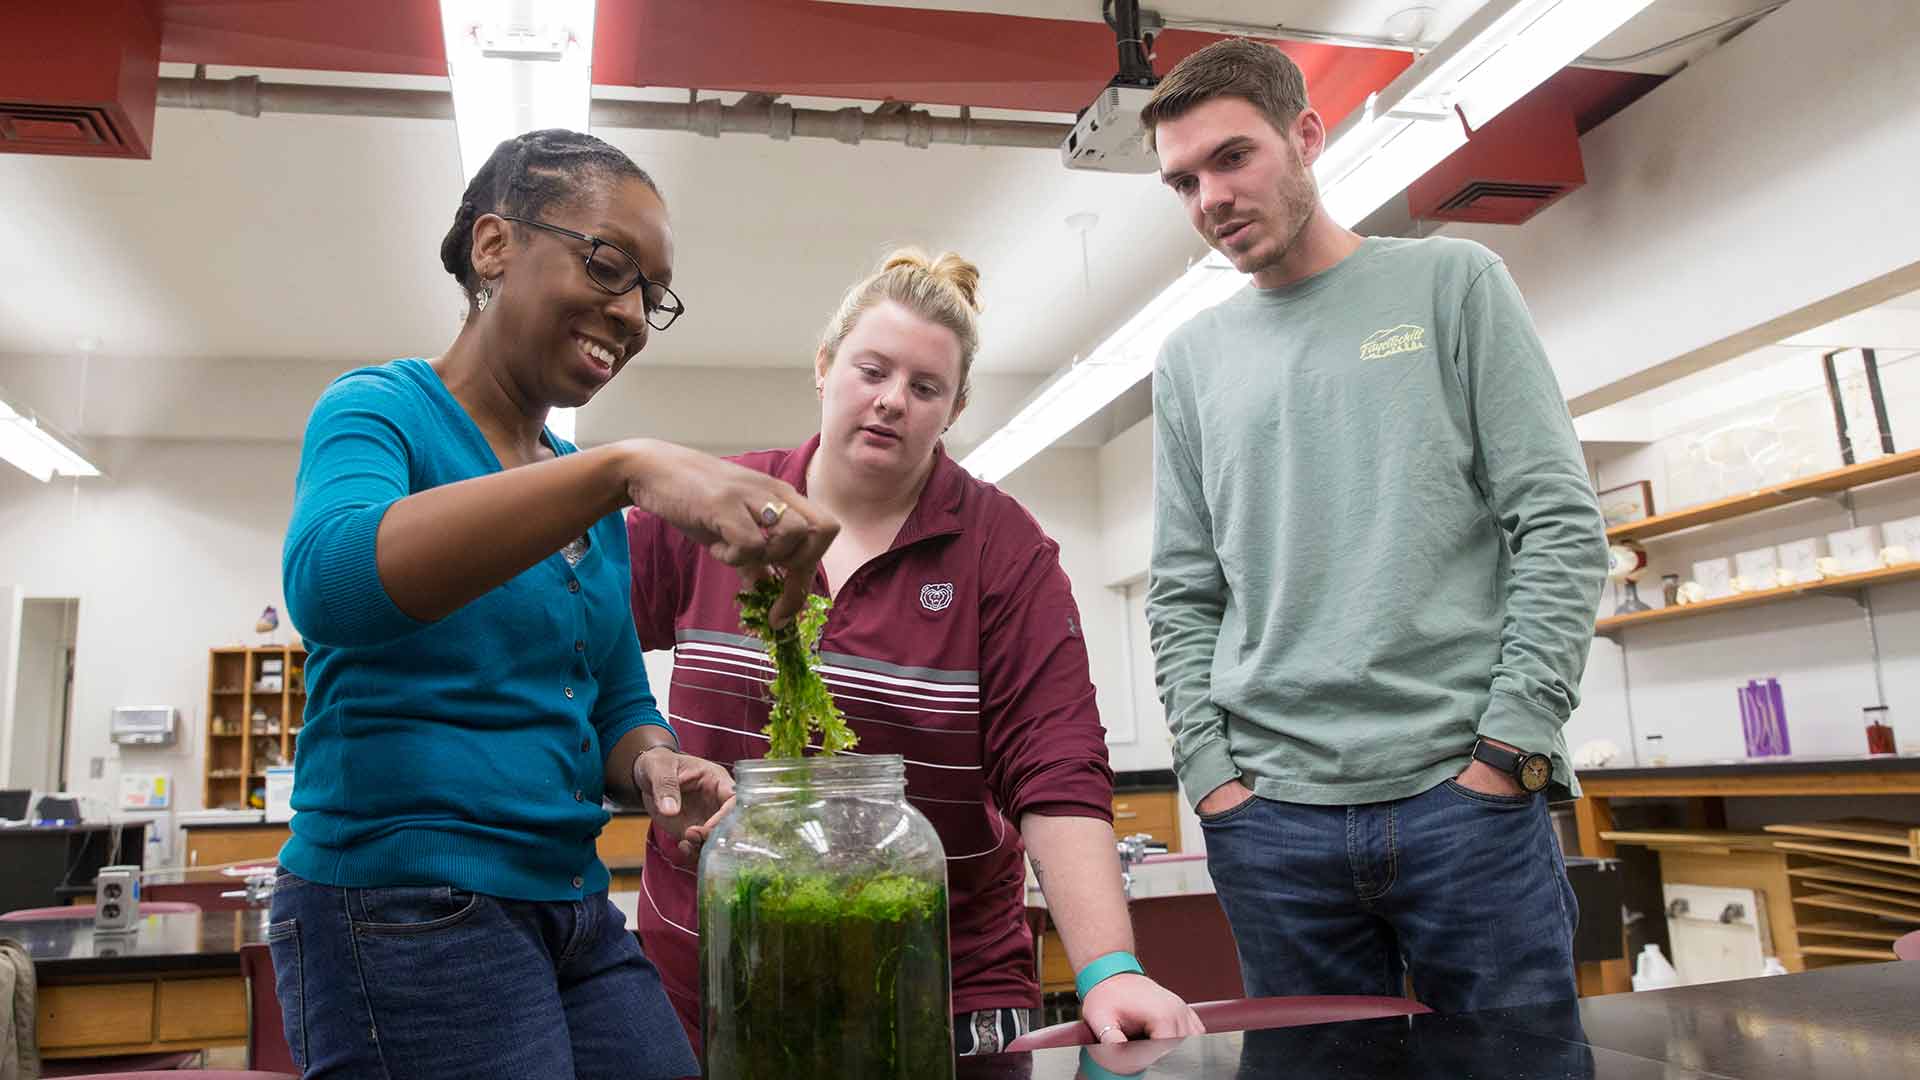 Dr. LaToya Kissoon-Charles pulls out duckweed from a container as two students watch.